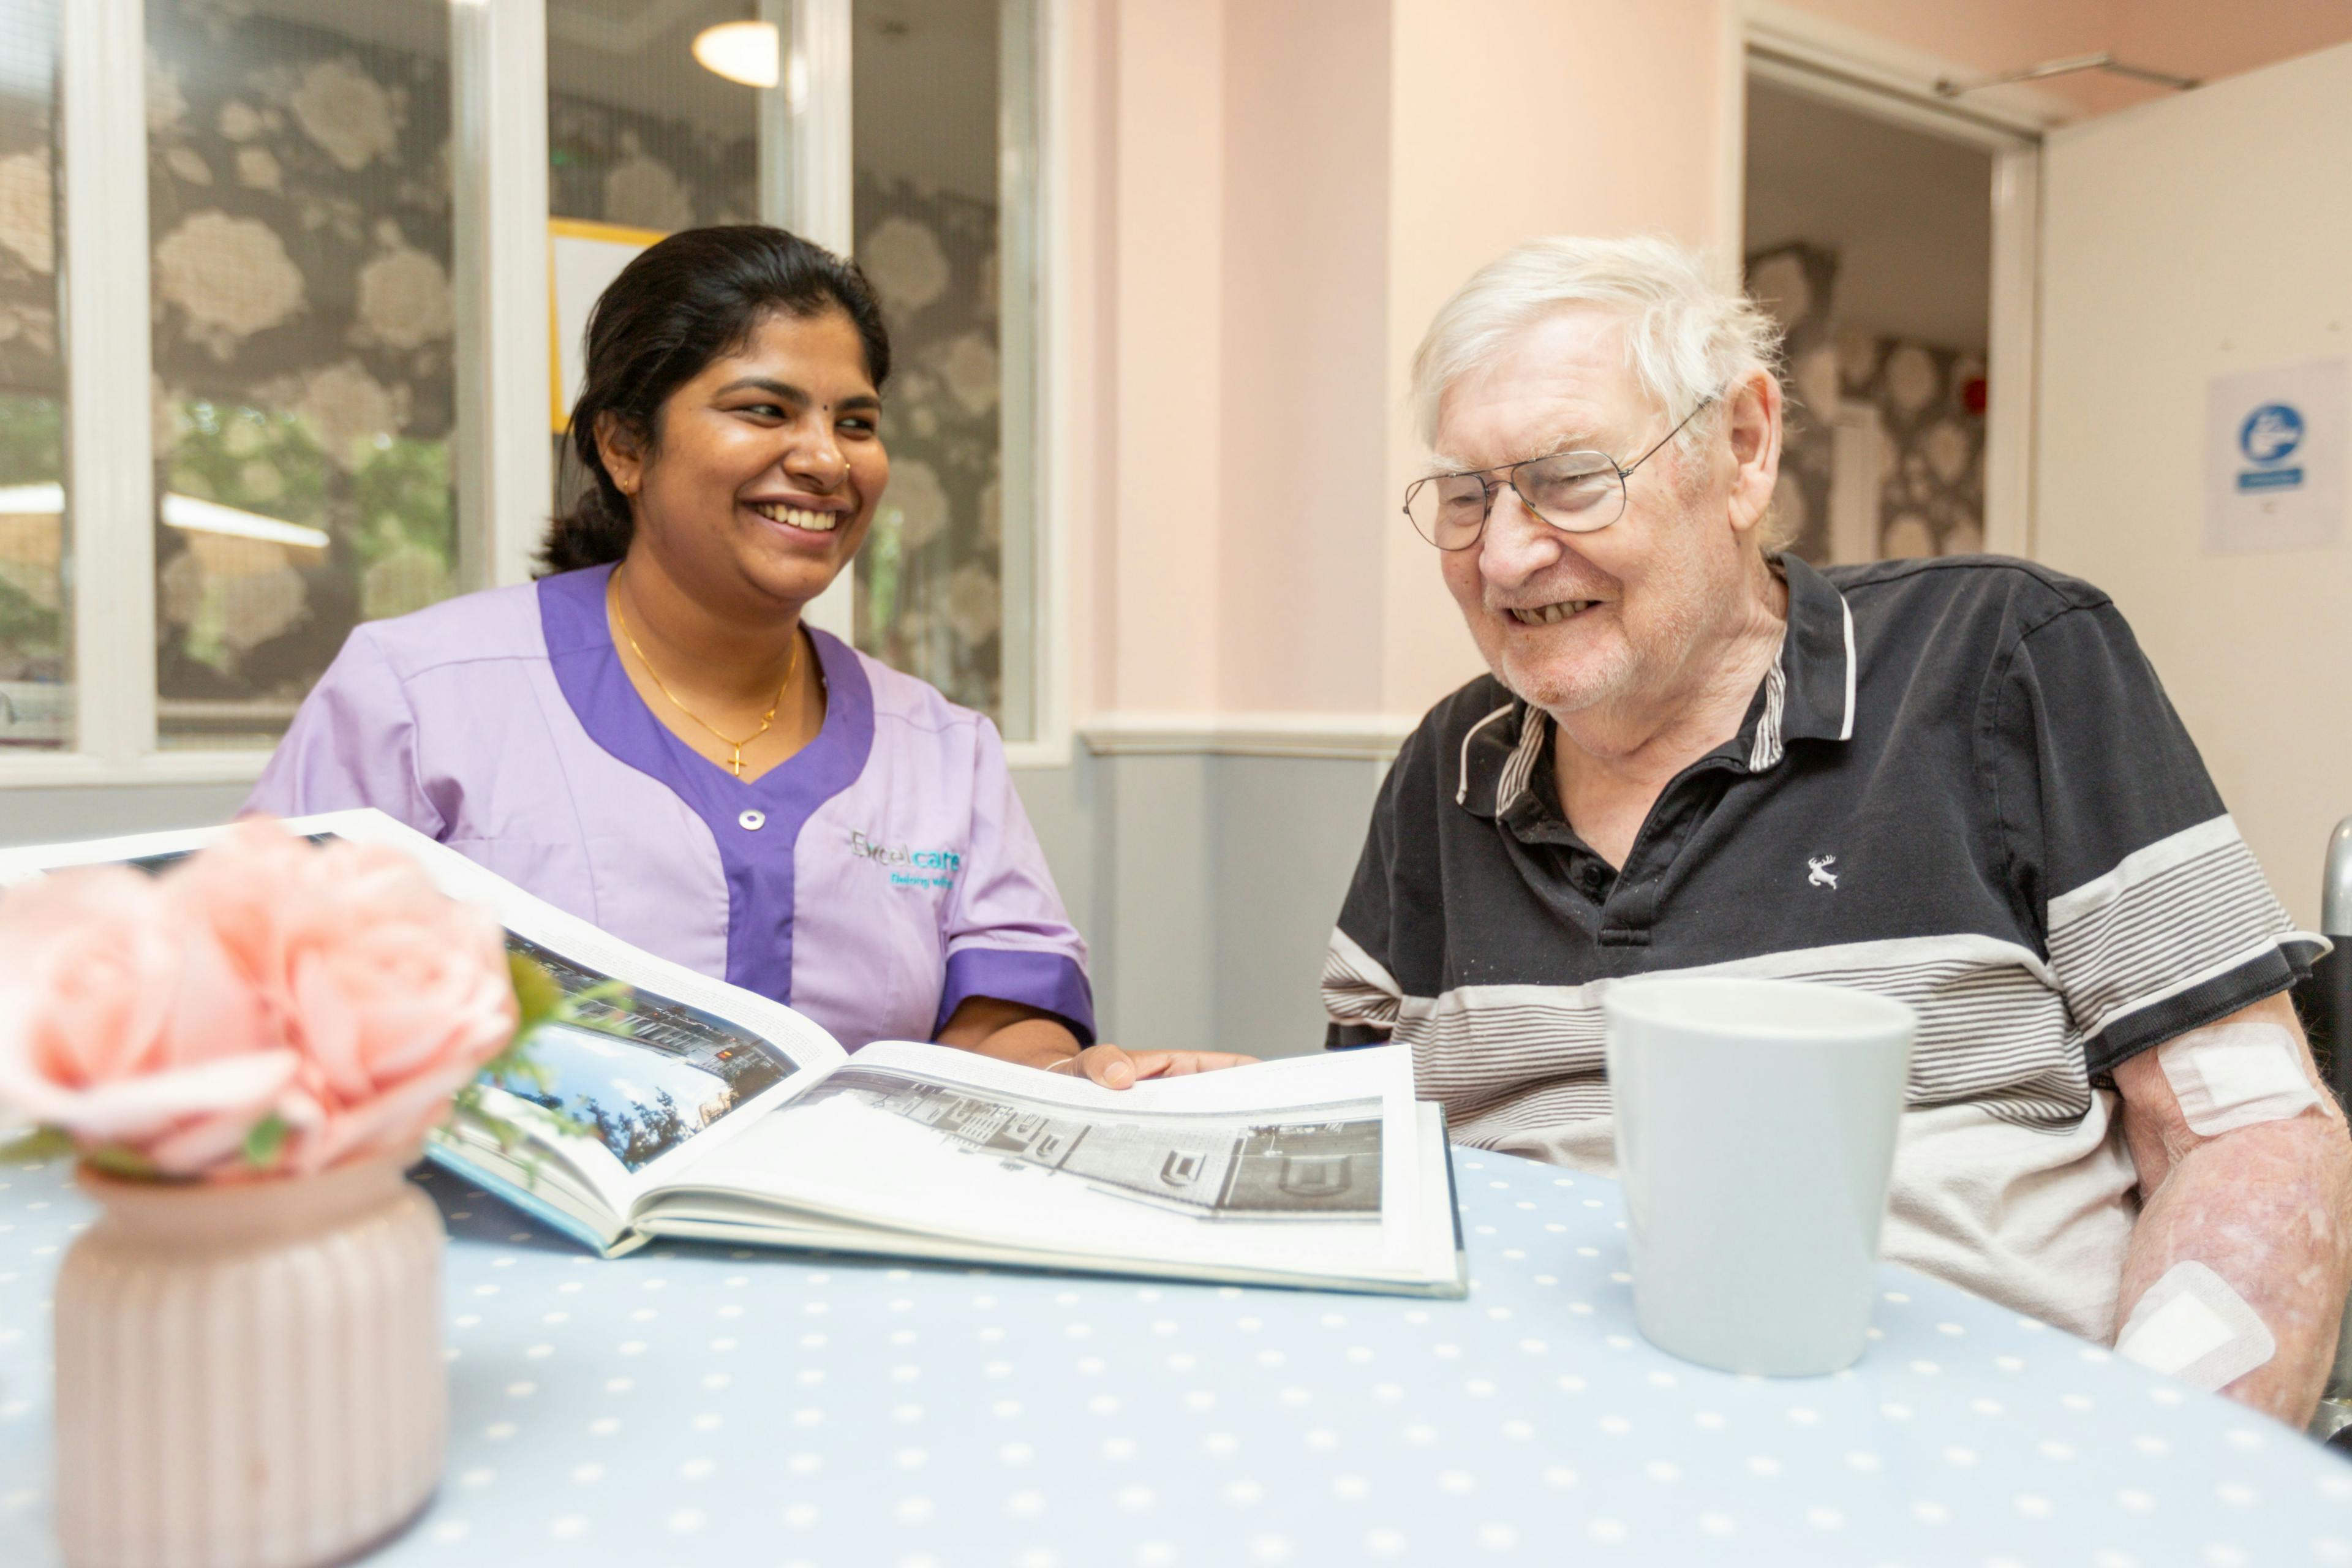 Residents at Buchan House care home in Cambridge